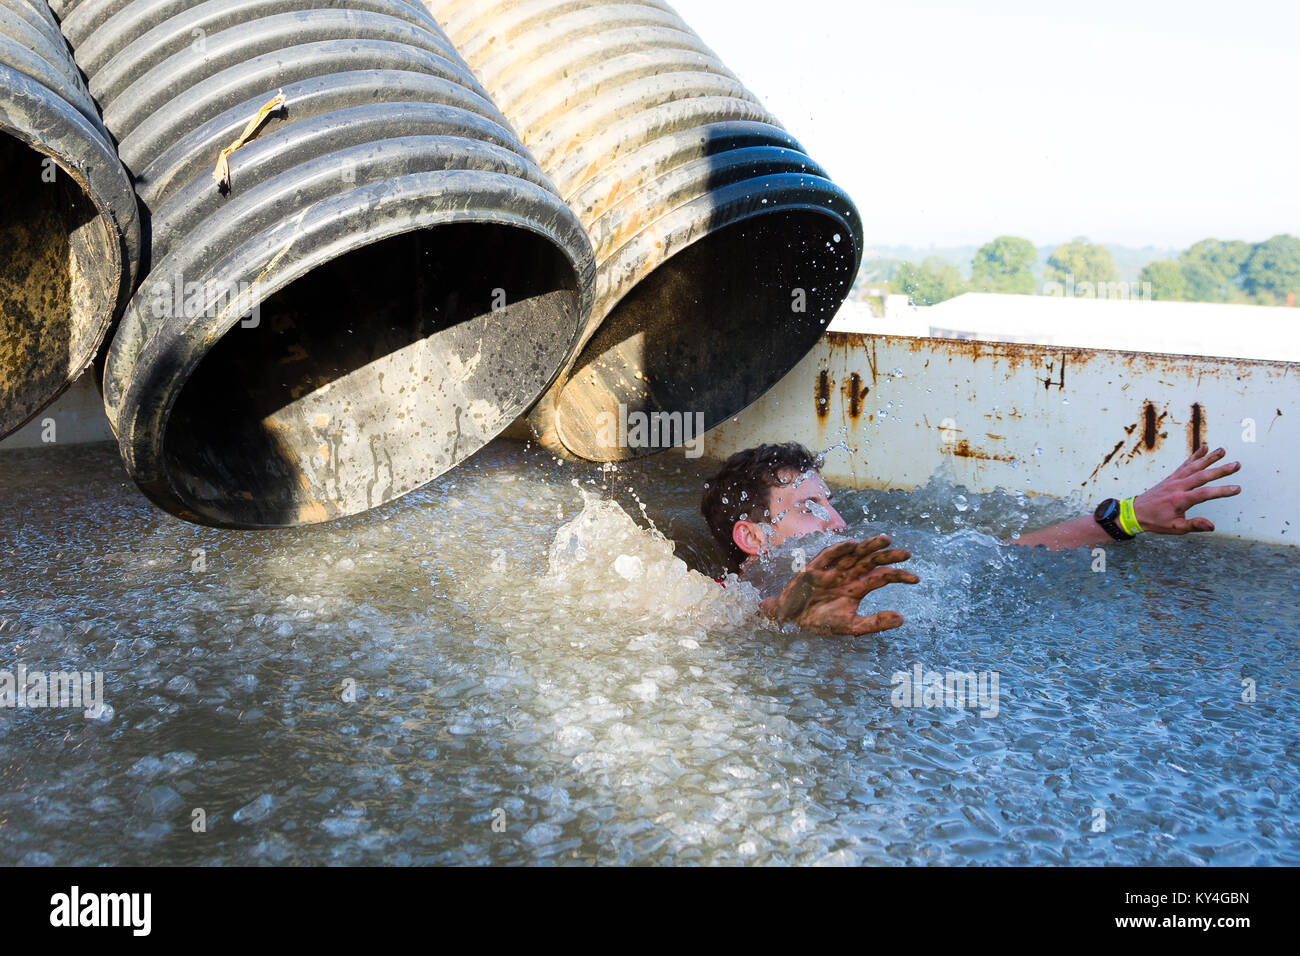 Sussex, UK. A male competitor splashes into the 'Arctic Enema' obstacle – a freezing cold pool of ice water – during a Tough Mudder event. Stock Photo